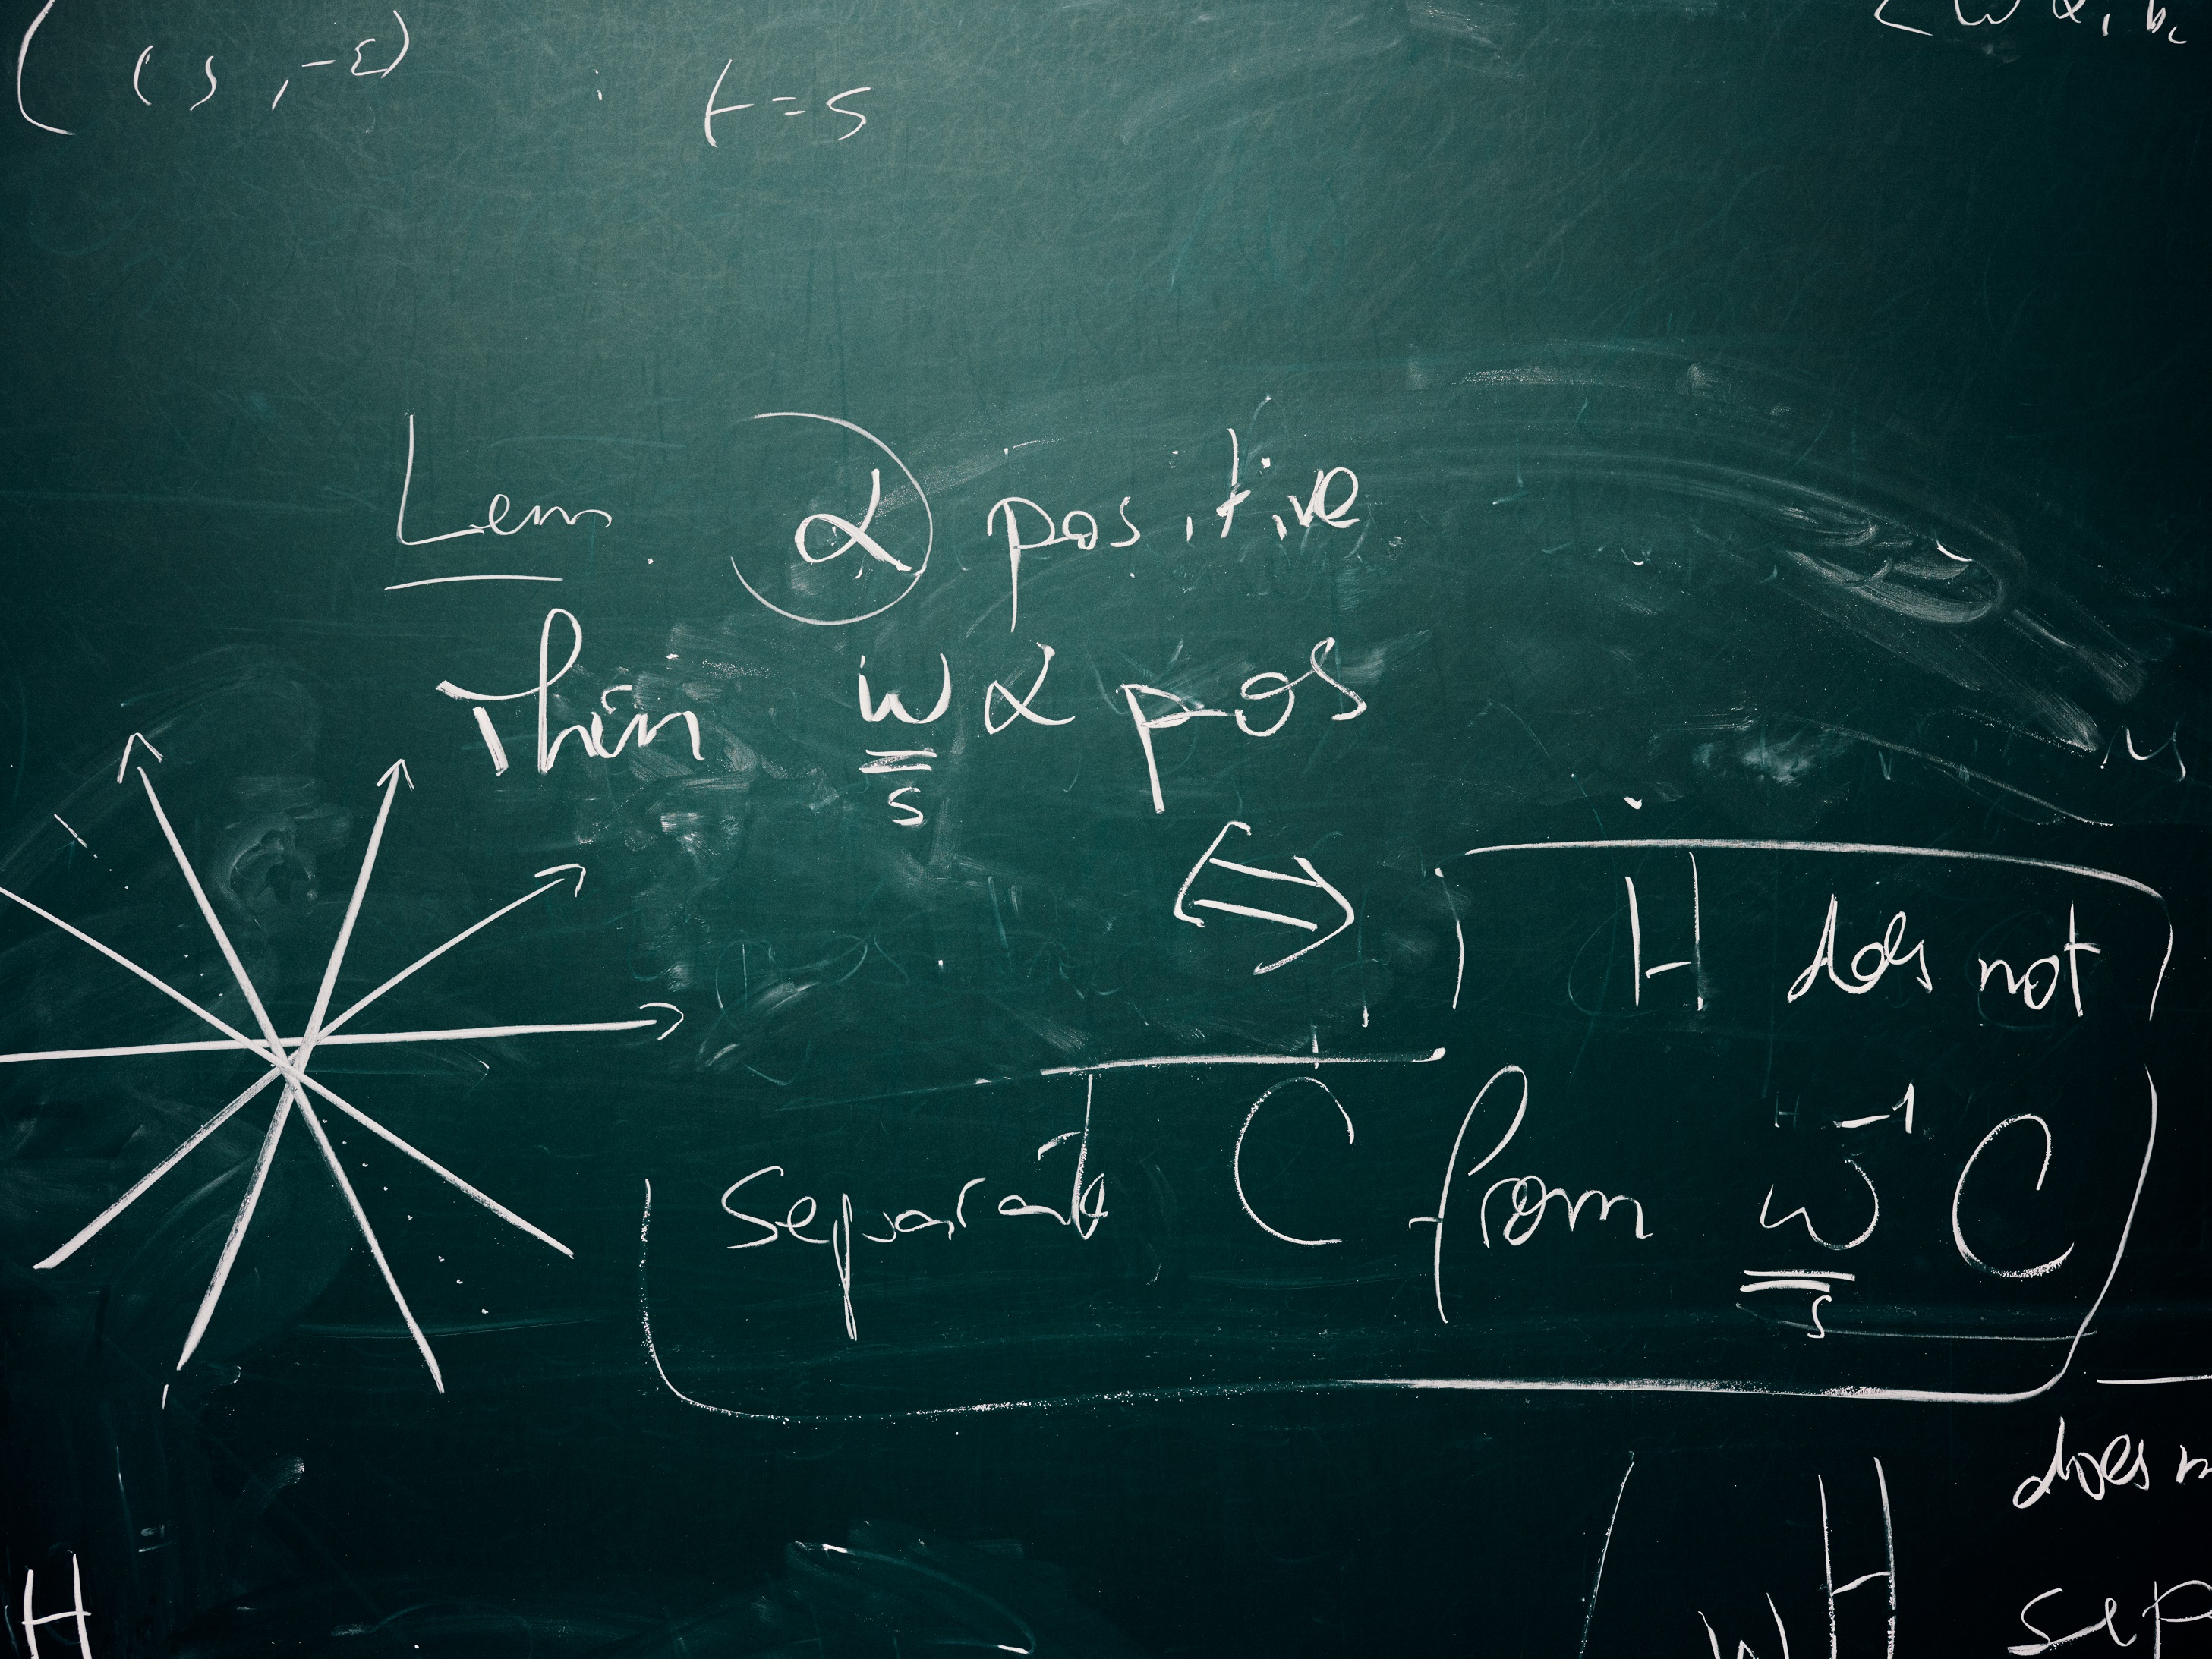 Blackboard with mathematical notes